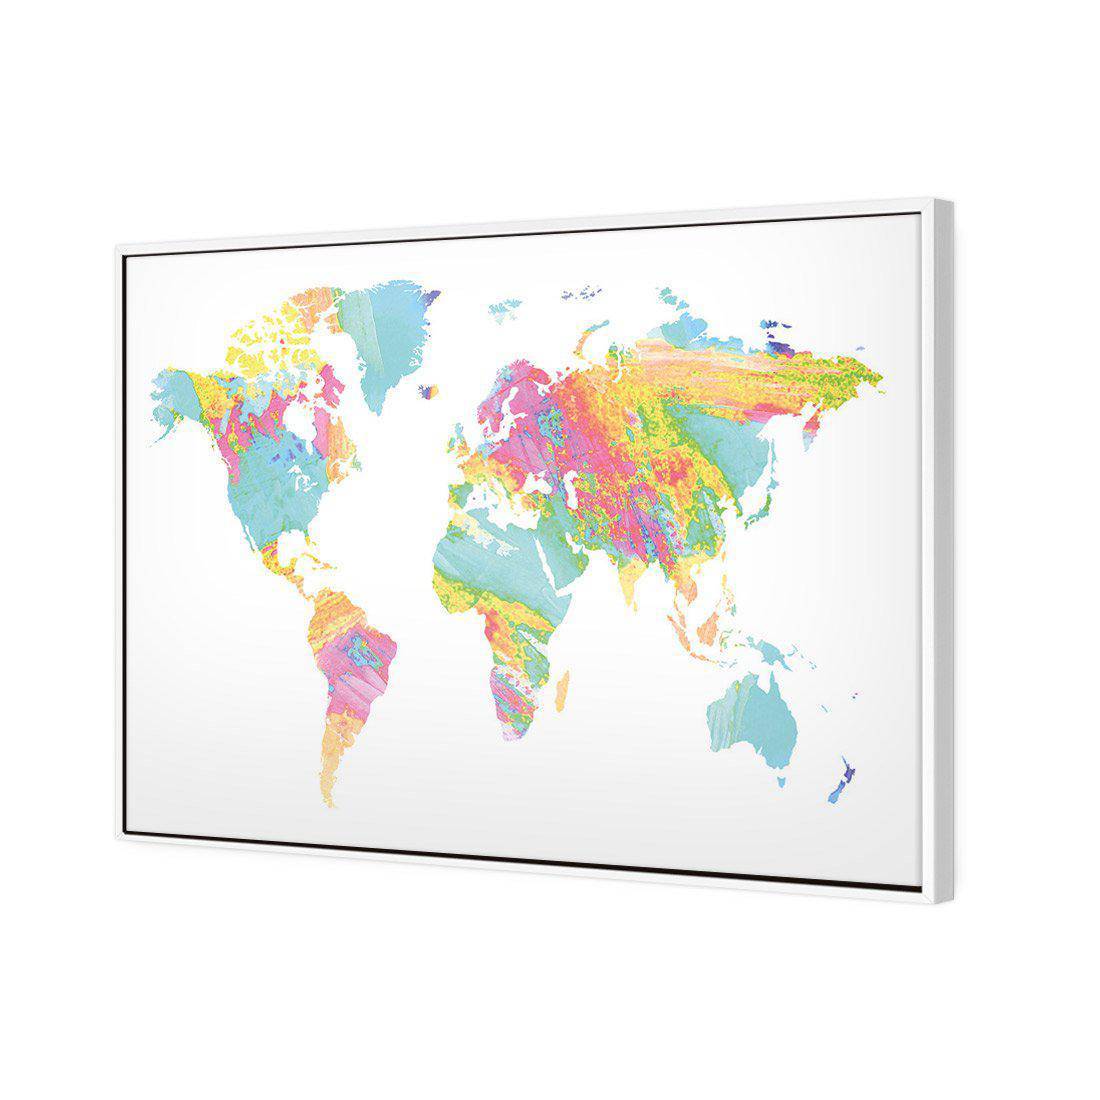 Painted Map Of The World, Pastel Canvas Art-Canvas-Wall Art Designs-45x30cm-Canvas - White Frame-Wall Art Designs